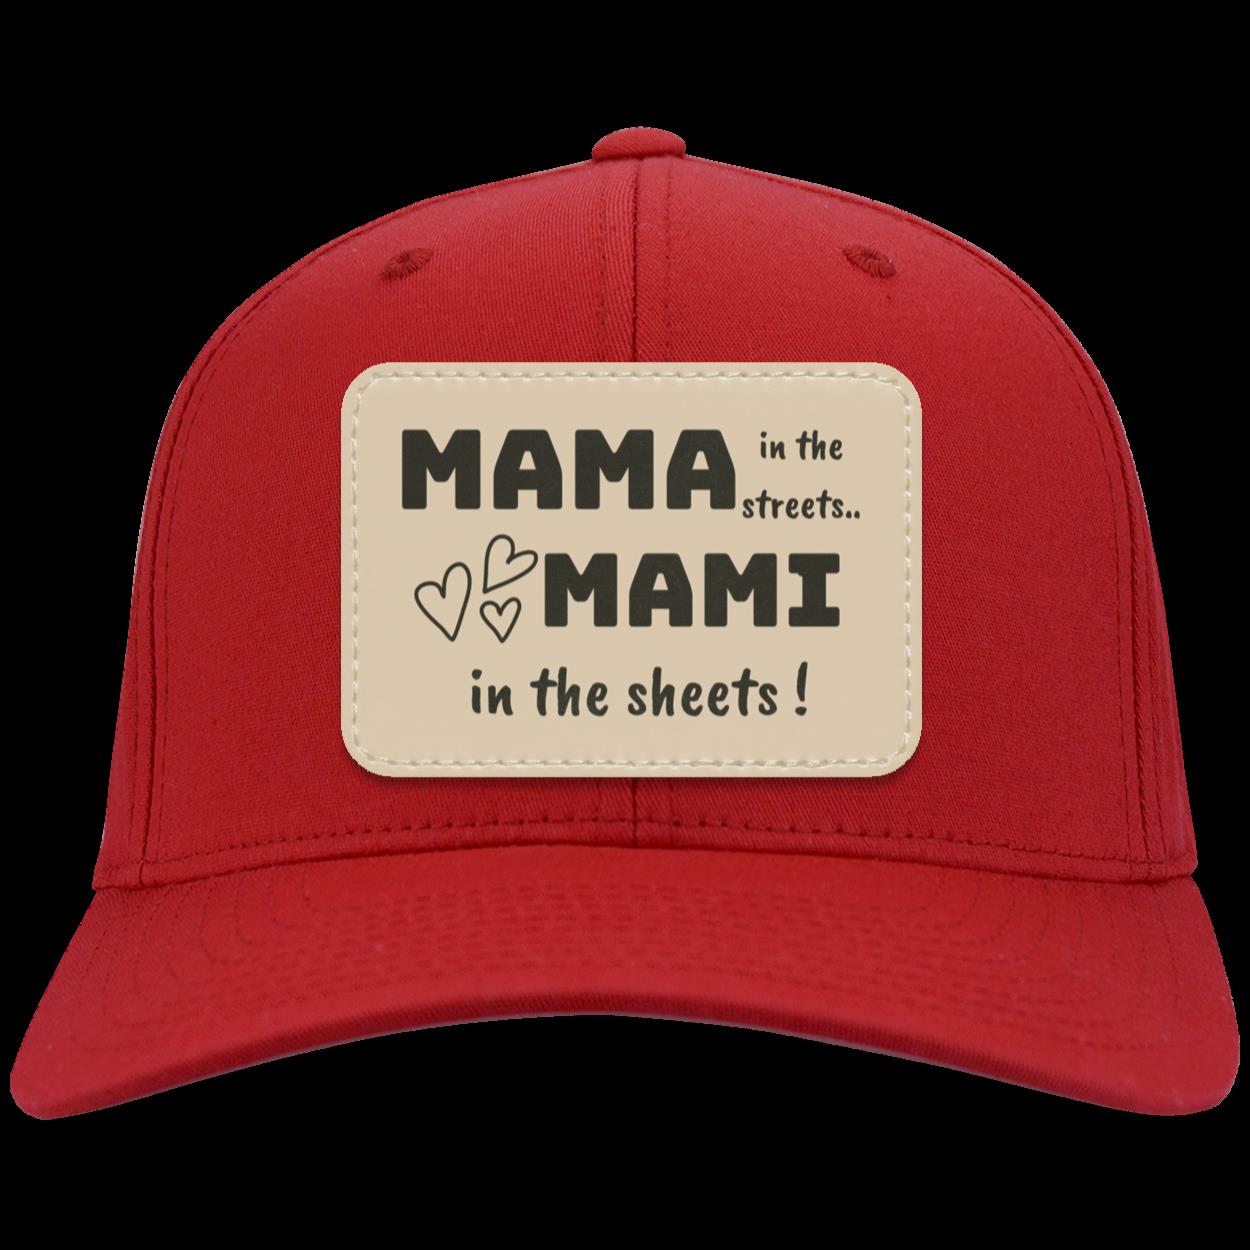 " Mama in the streets, Mami in the sheets" Cotton Twill Cap